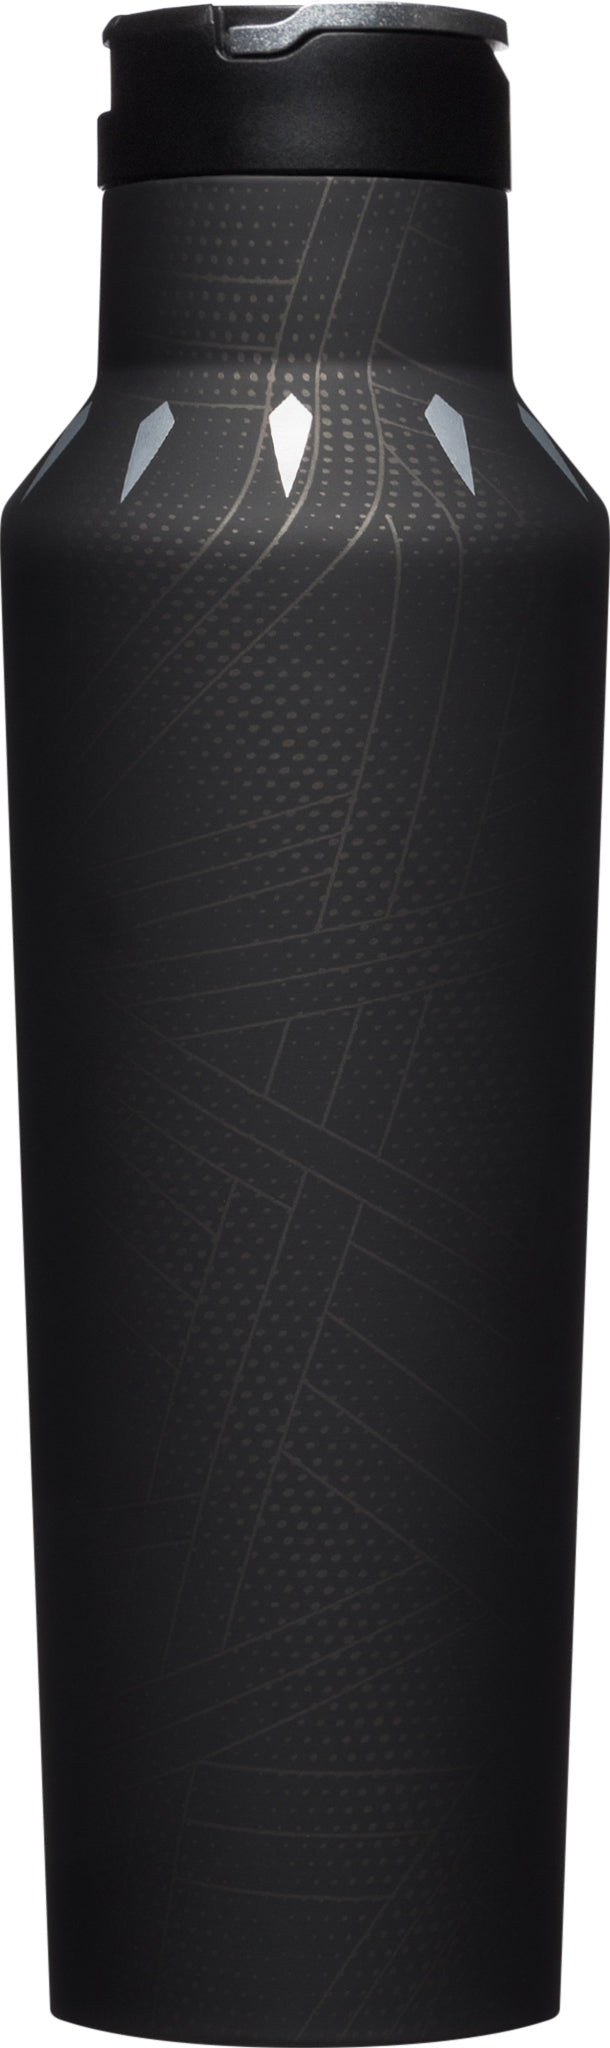 Black Panther Stainless Steel Canteen by Corkcicle